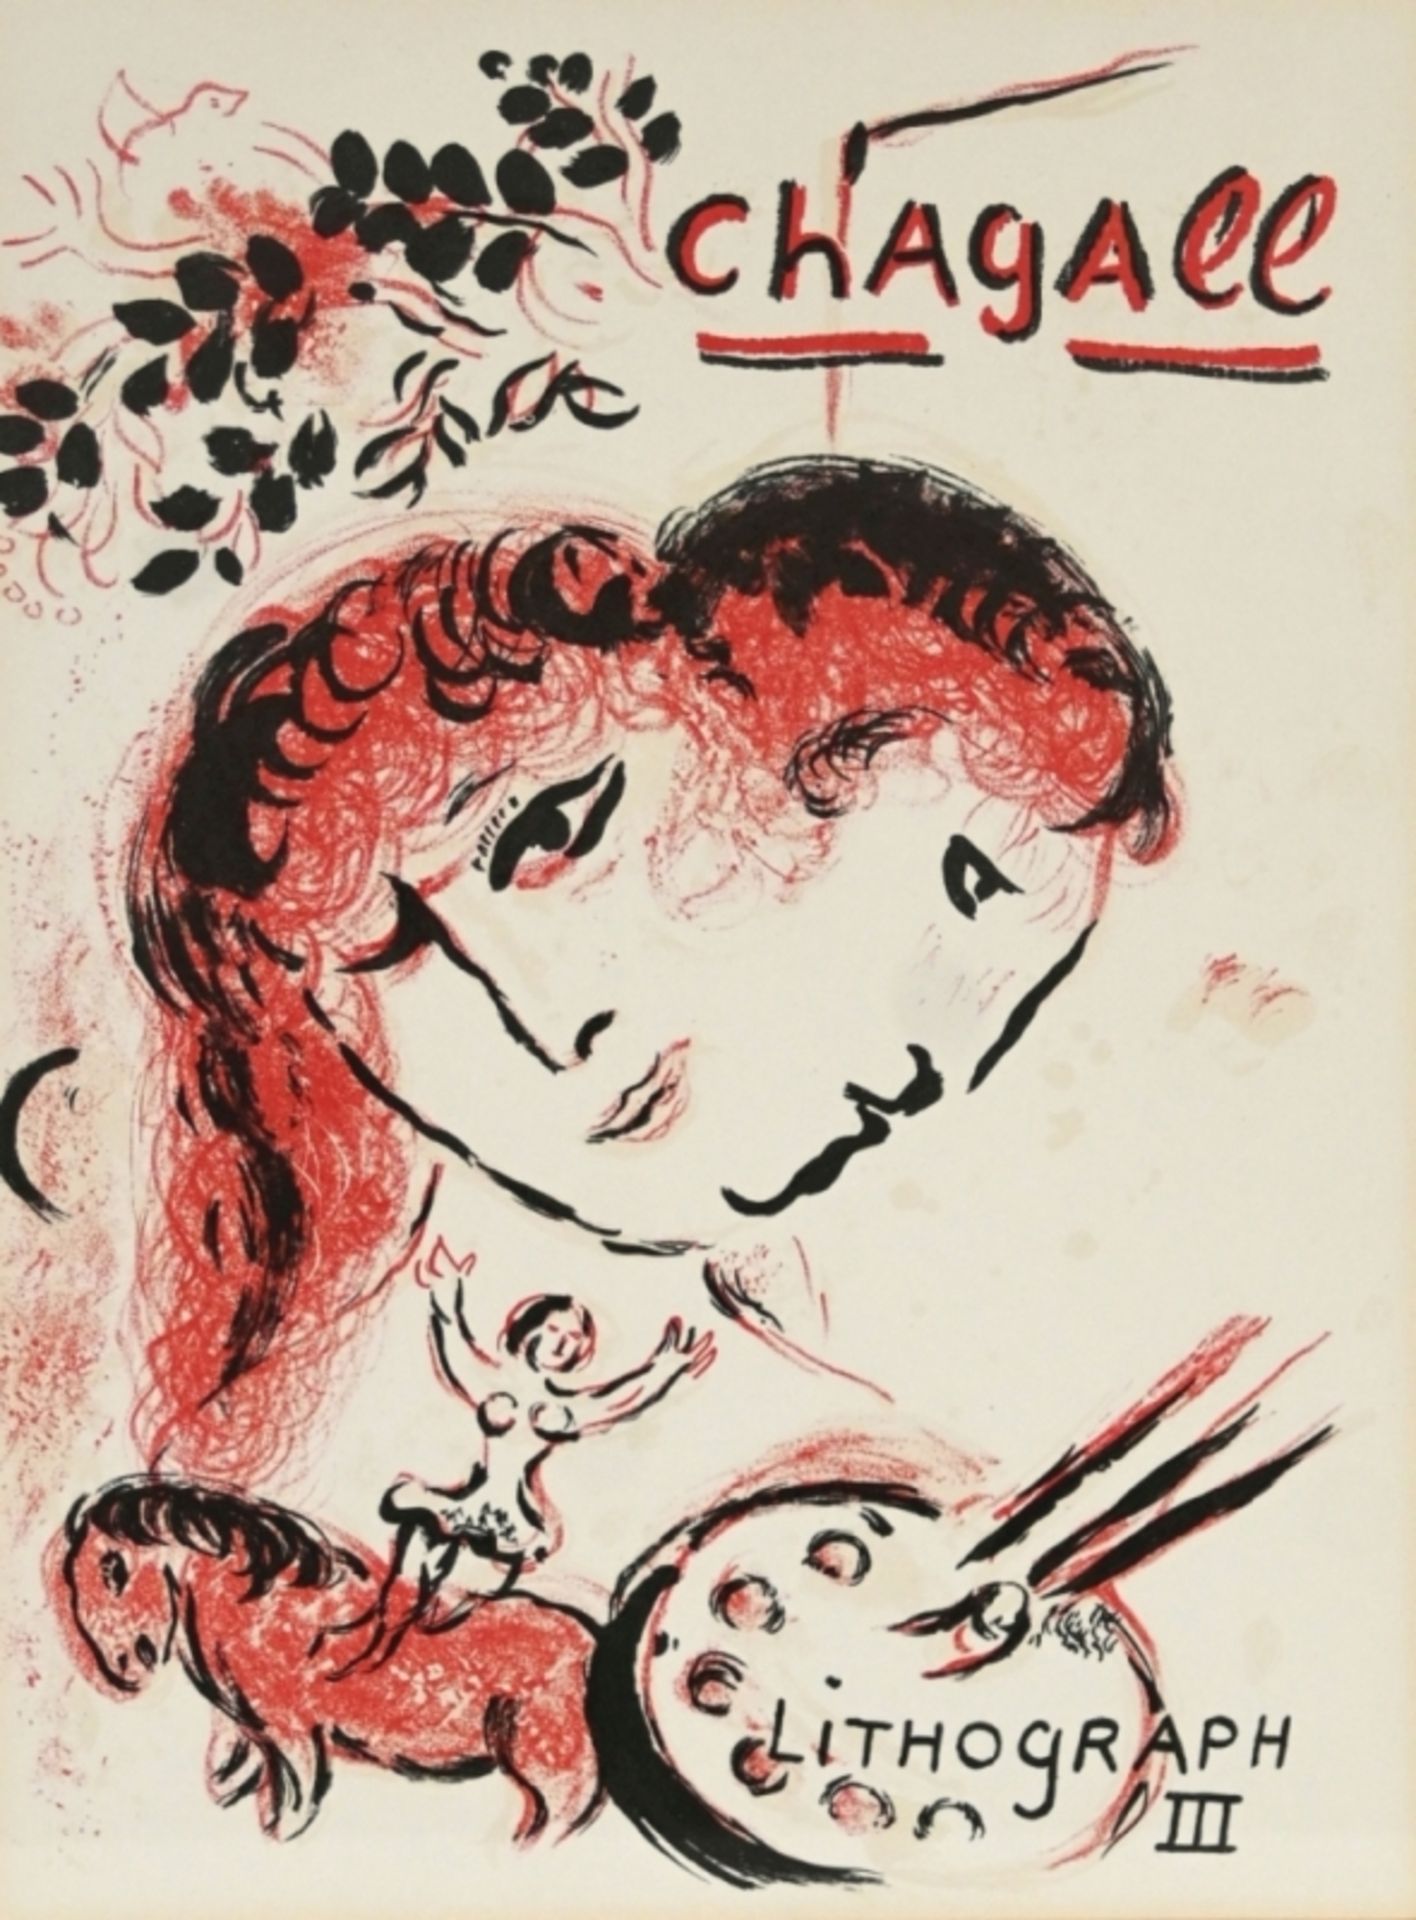 CHAGALL Marc "Lithograph III"